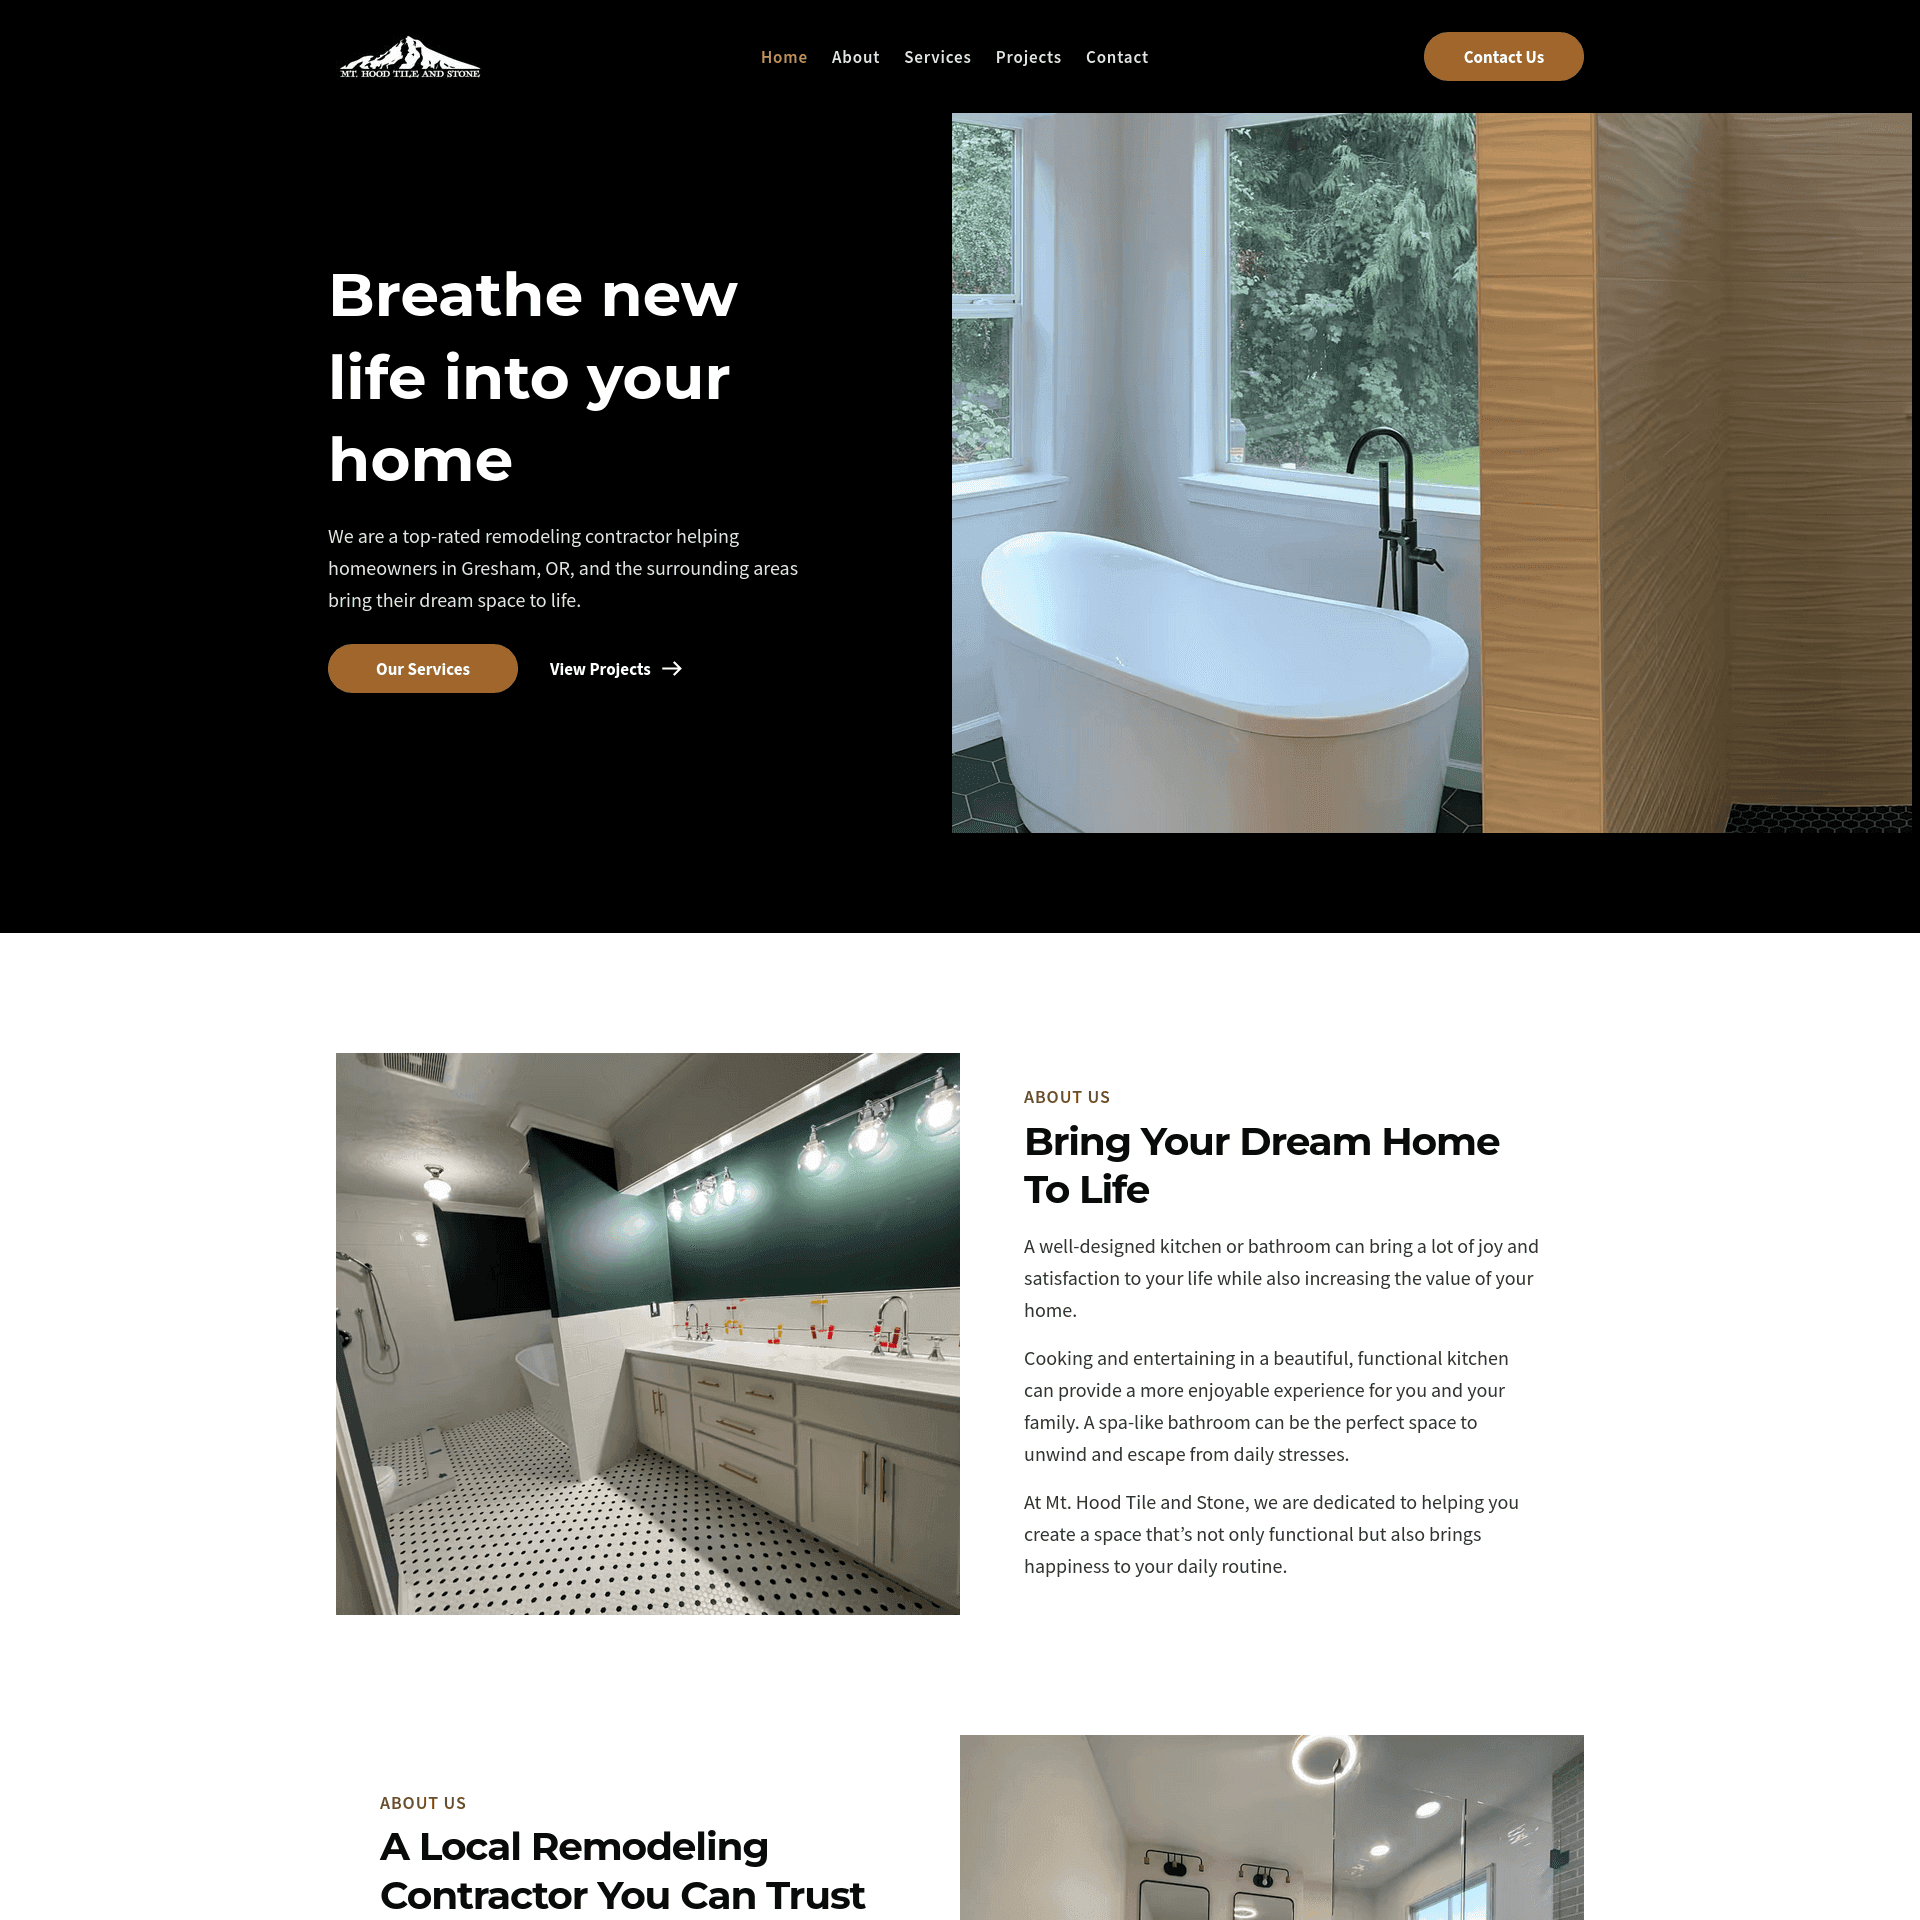 Website for Mt. Hood Tile and Stone